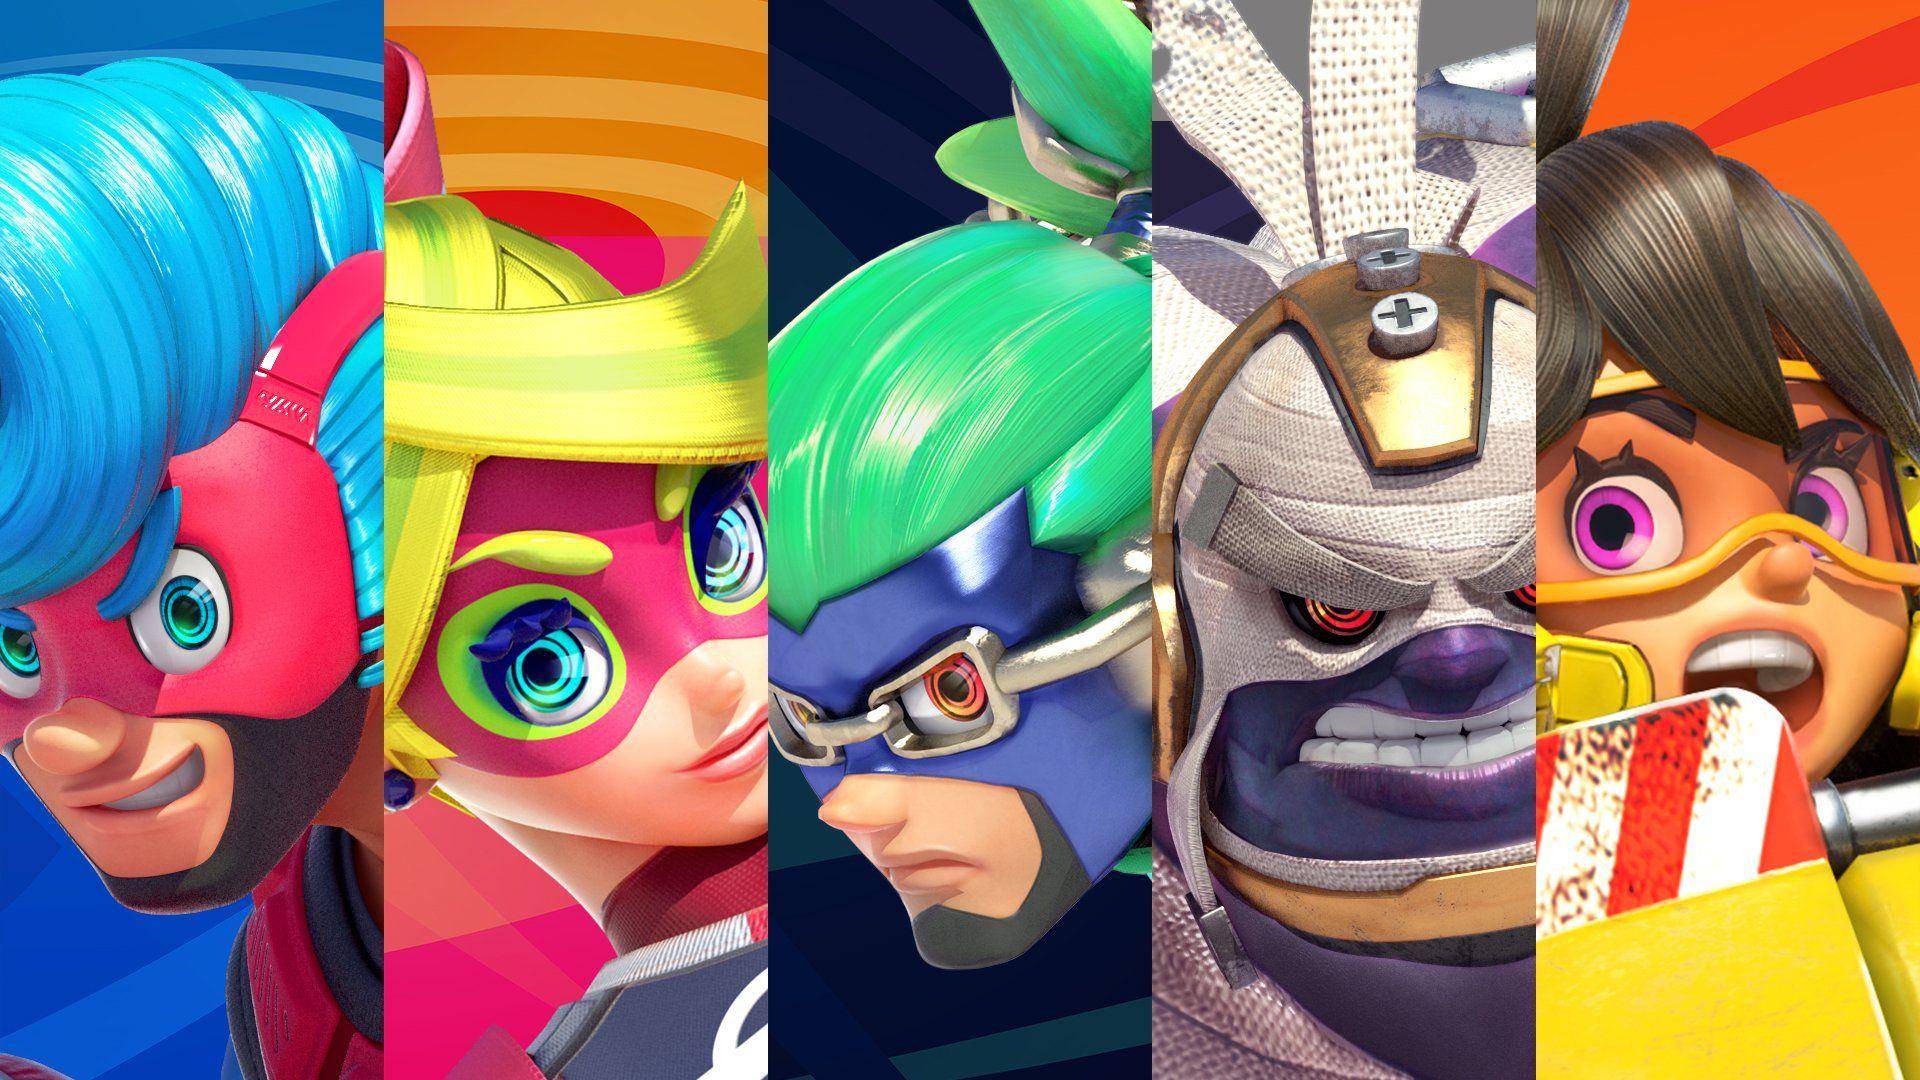 ARMS is the latest EDGE cover title